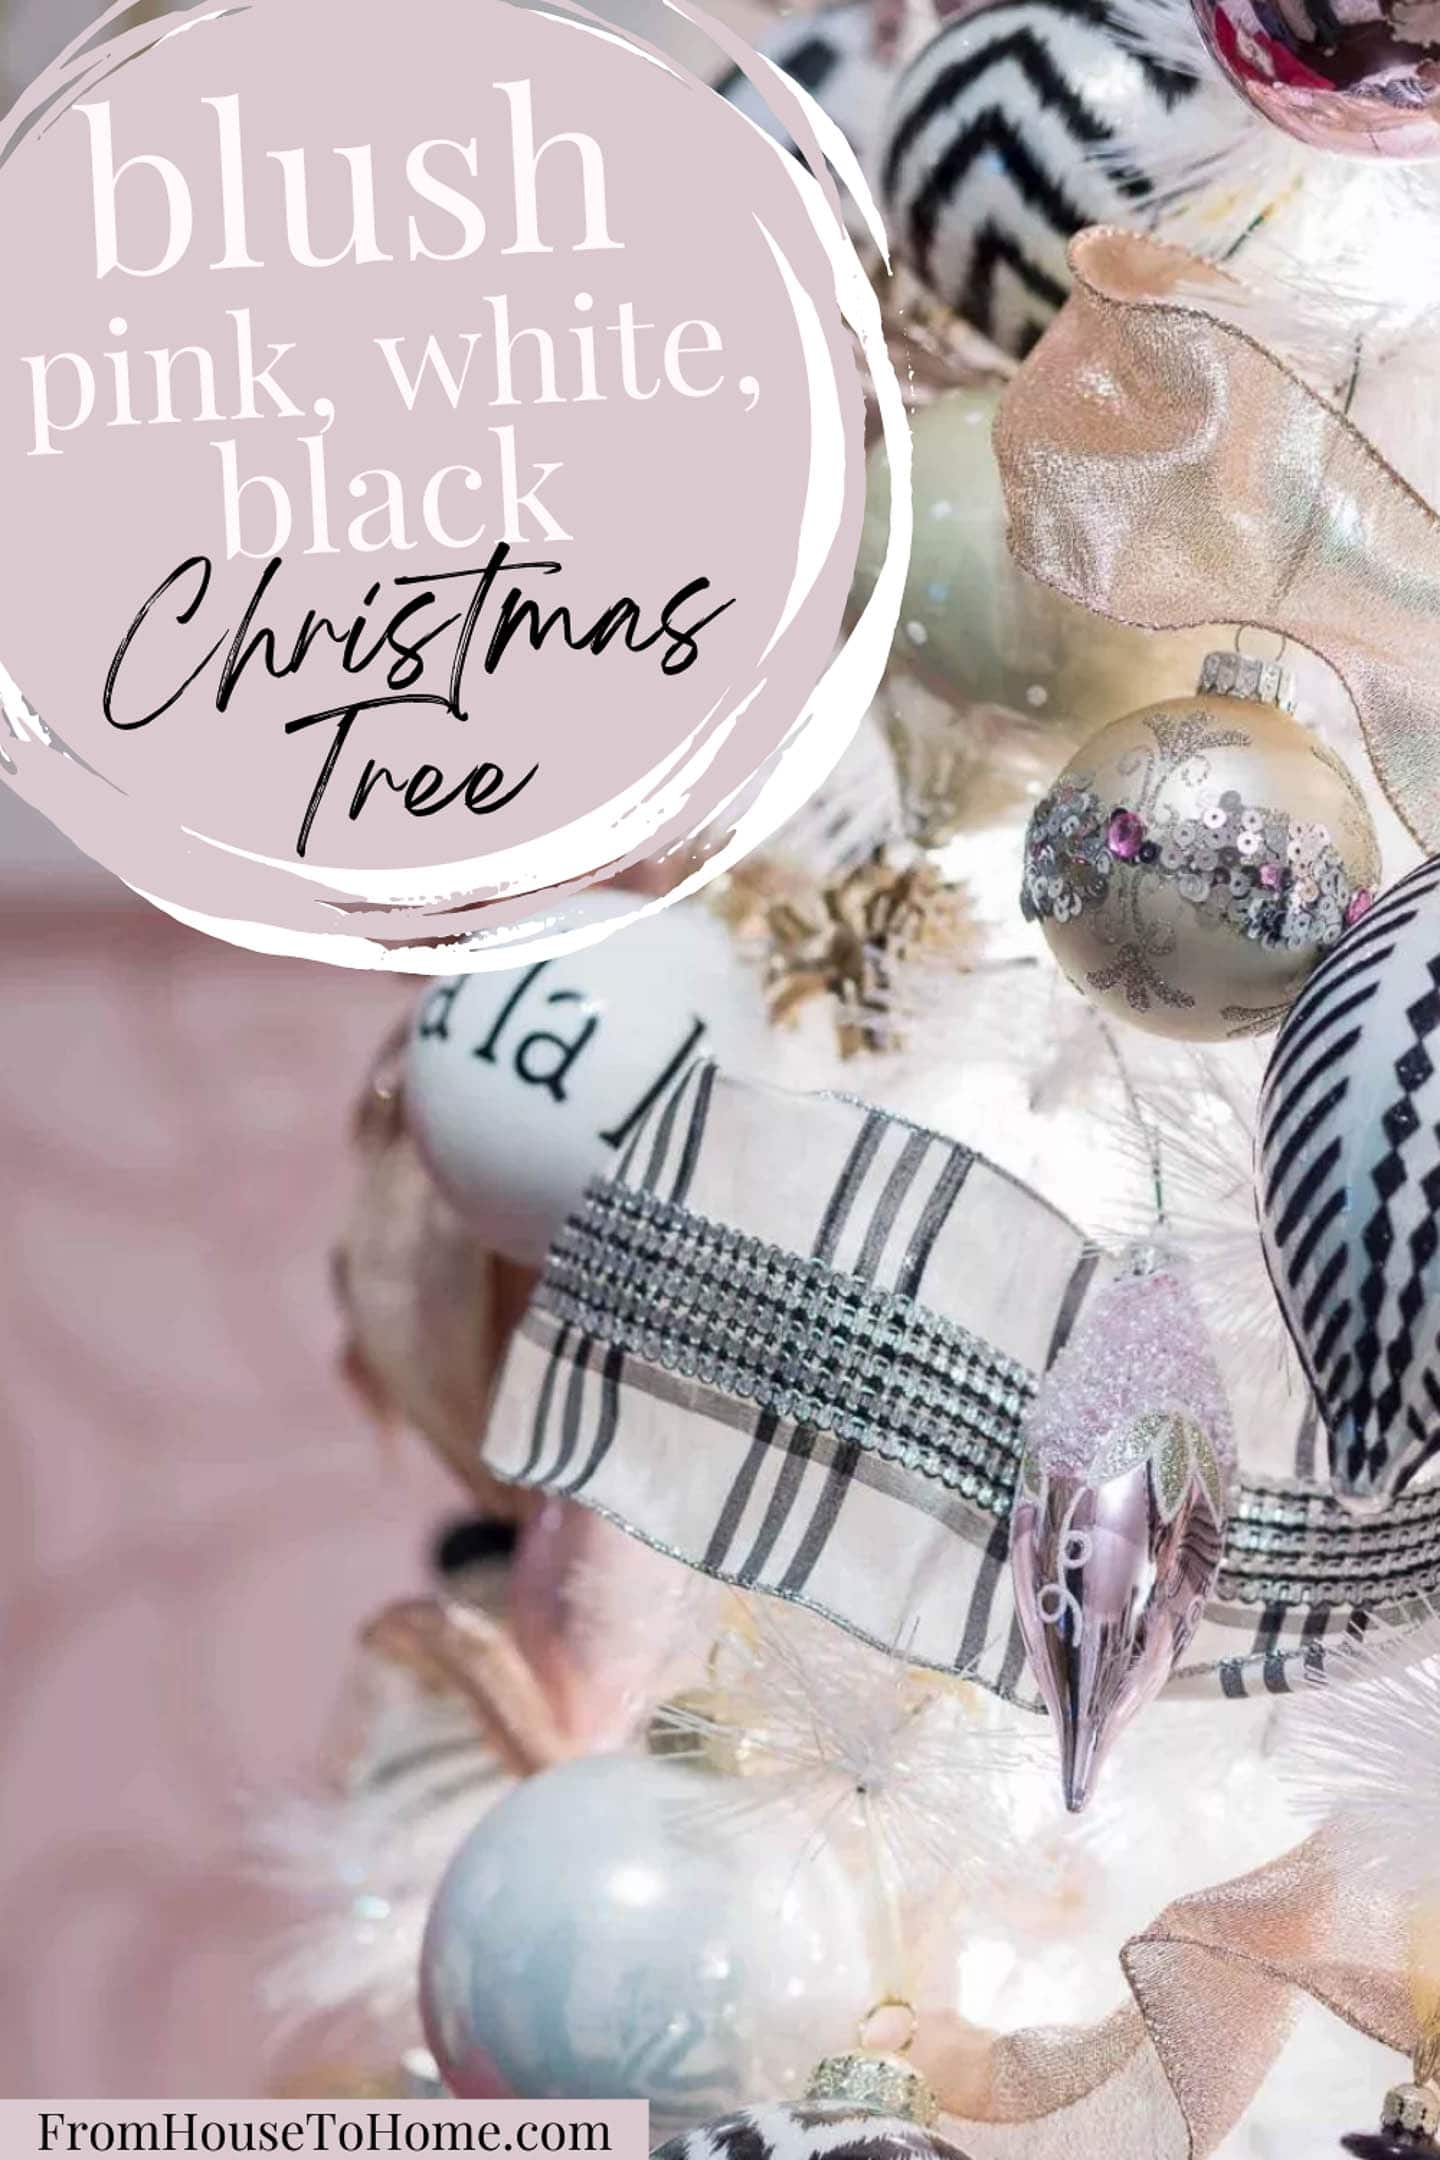 Pink, white and black christmas tree